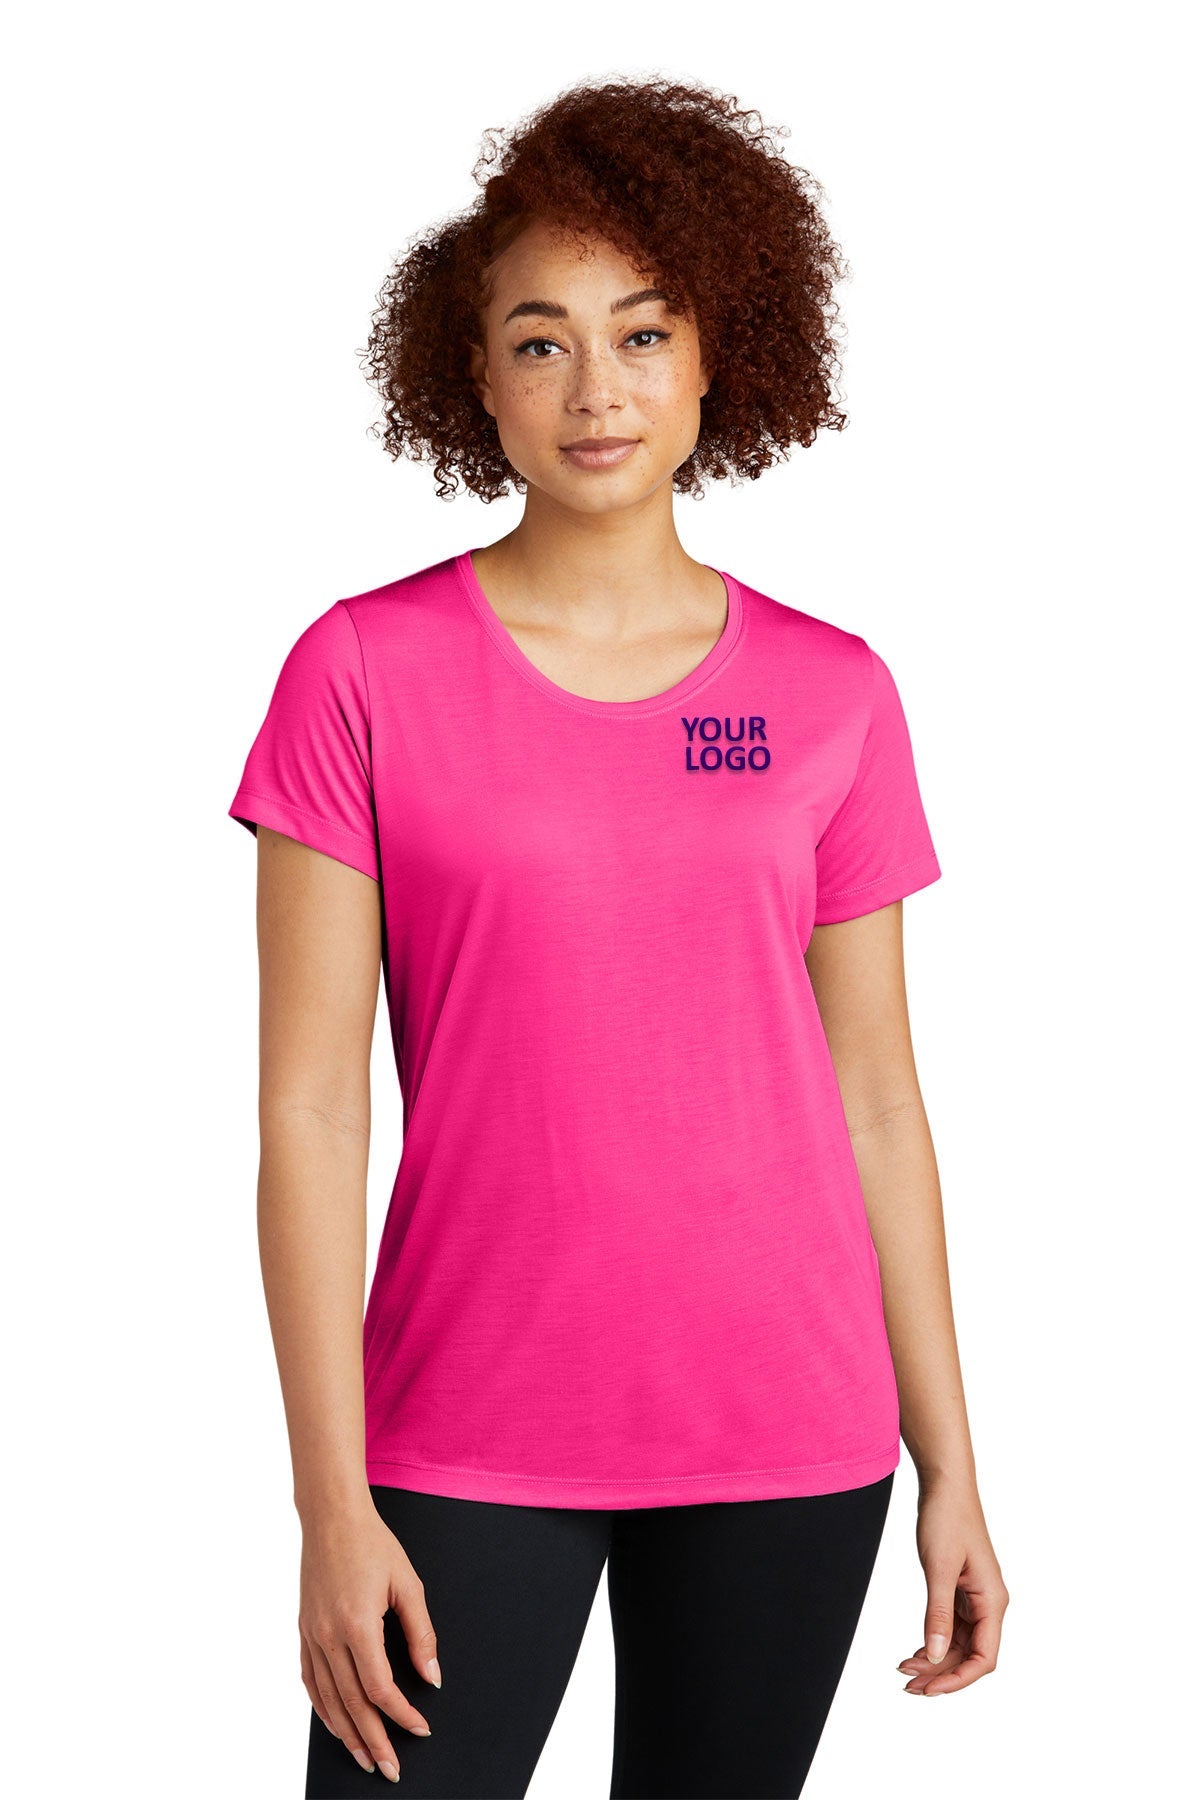 Sport-Tek Ladies PosiCharge Competitor Cotton Touch Scoop Neck Tee